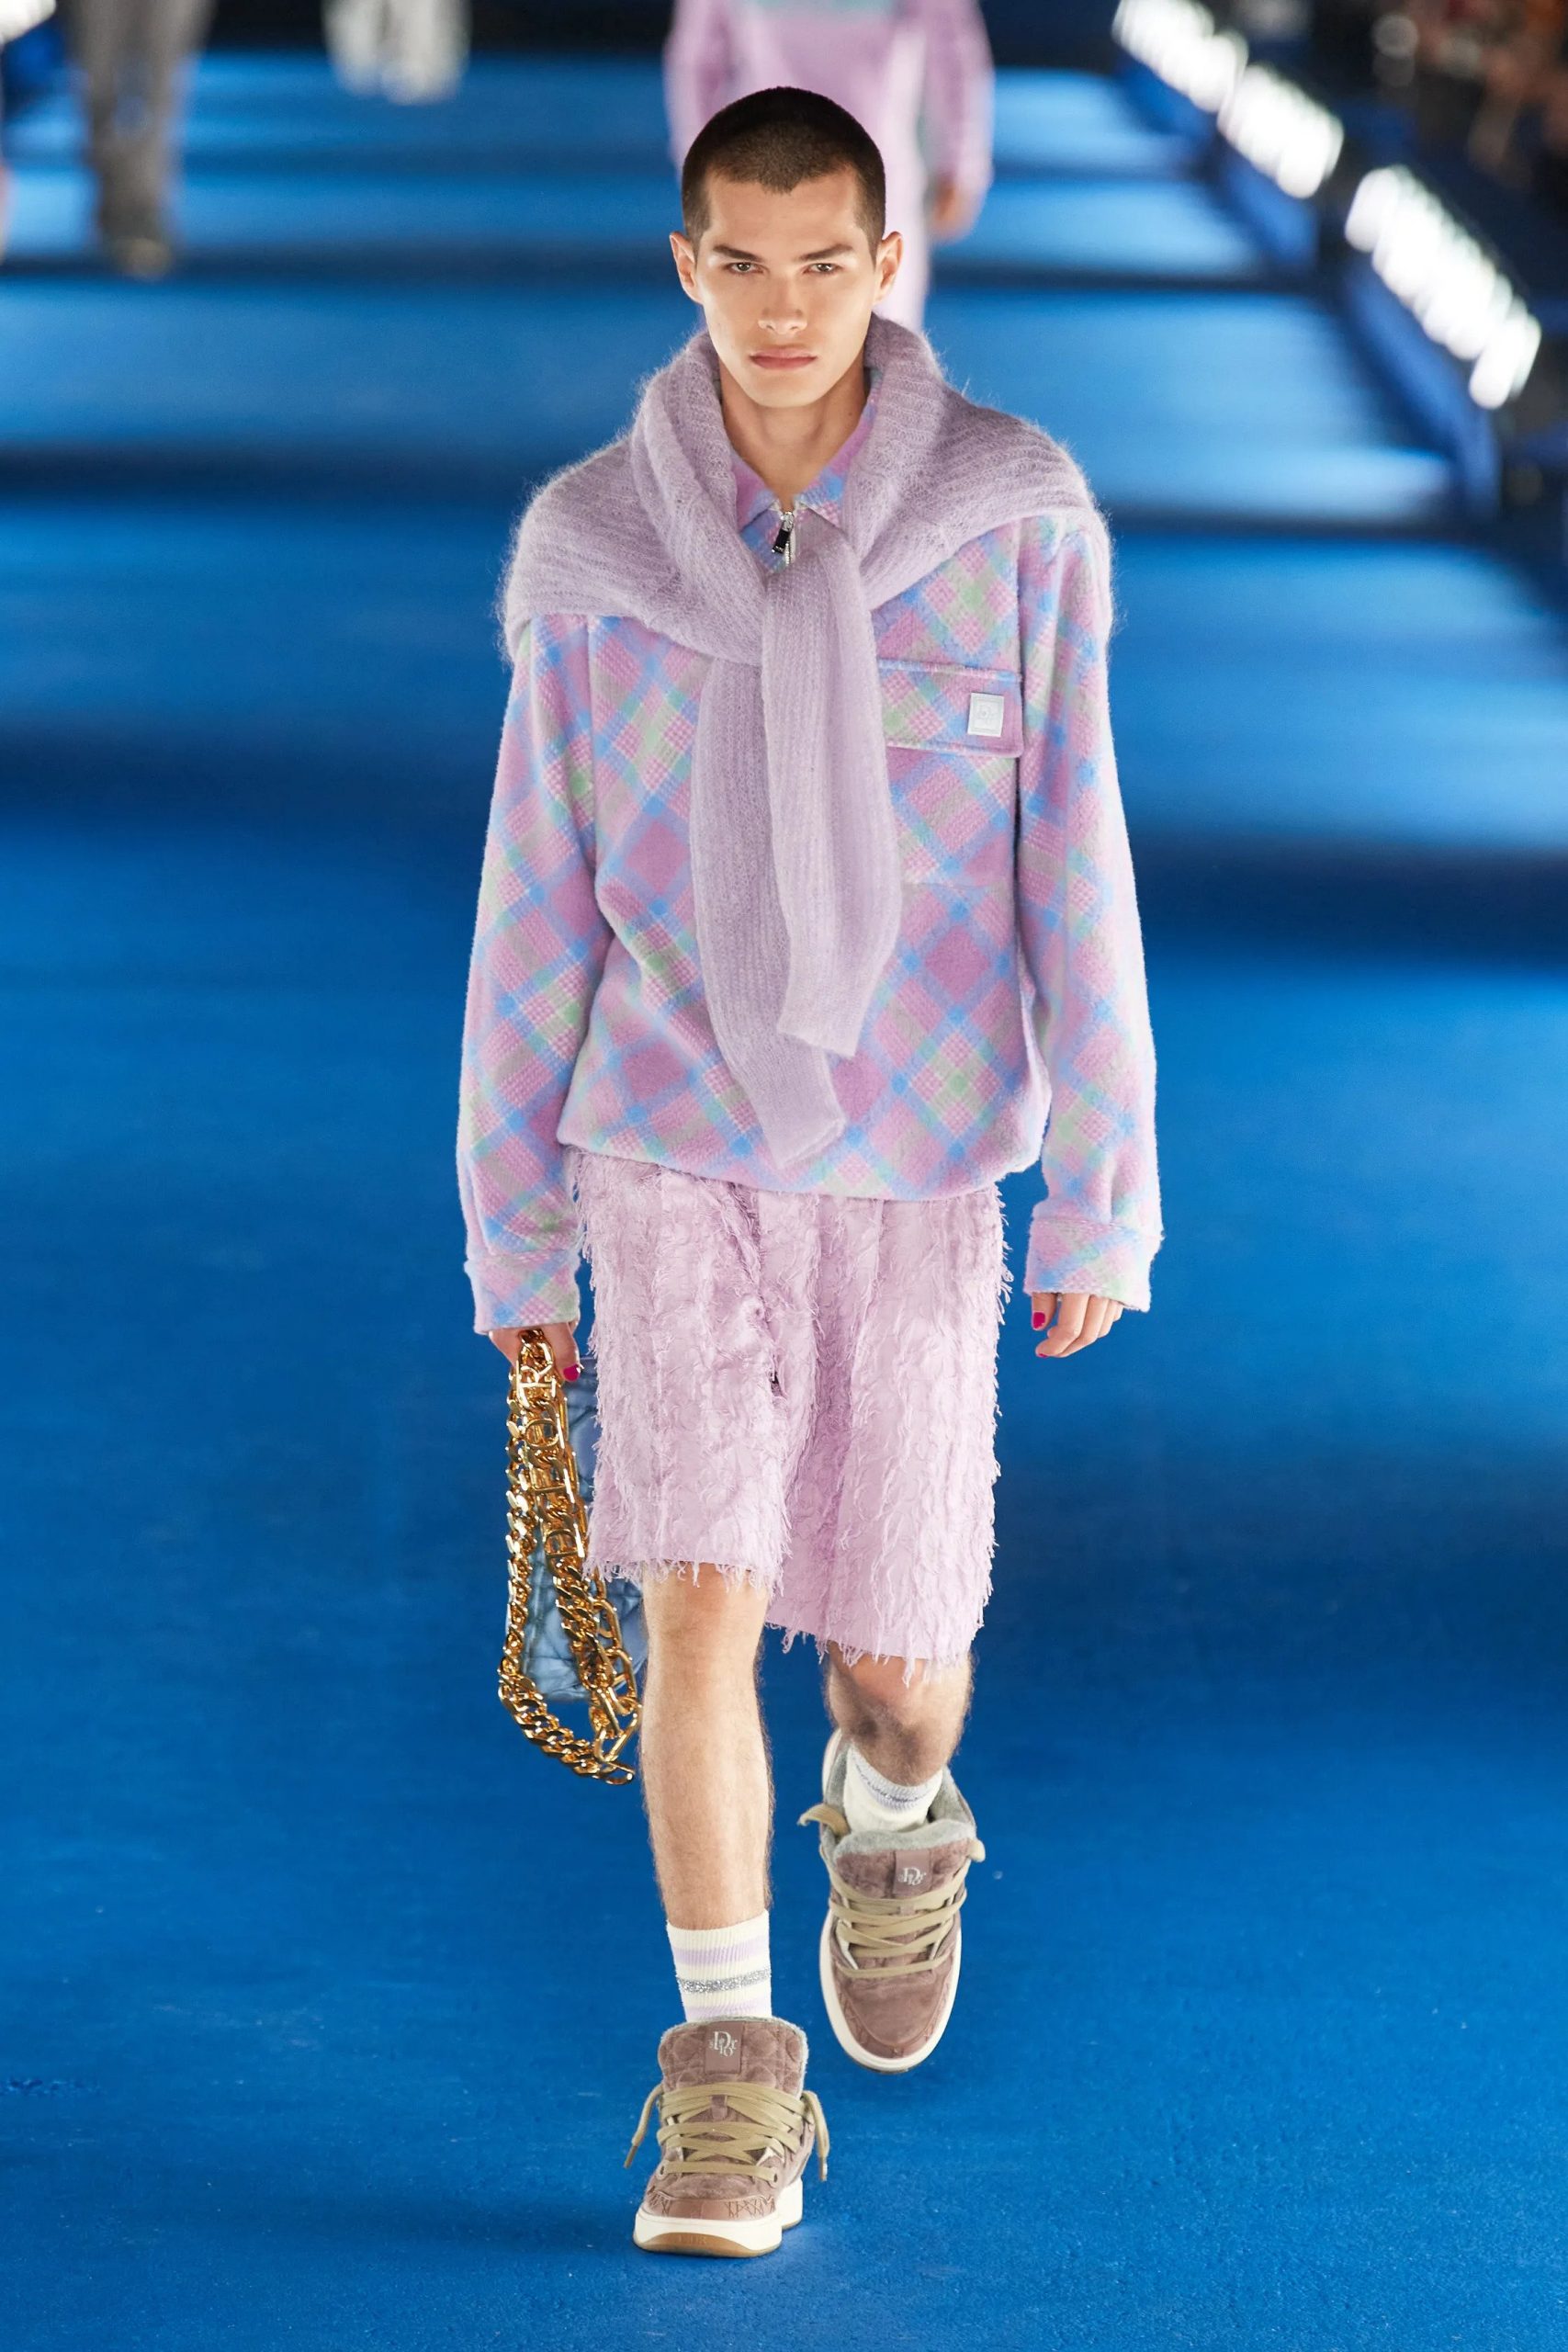 Dior’s Kim Jones teams up with Designer Eli Russell Linnetz for a LA inspired Resort 2023 collection